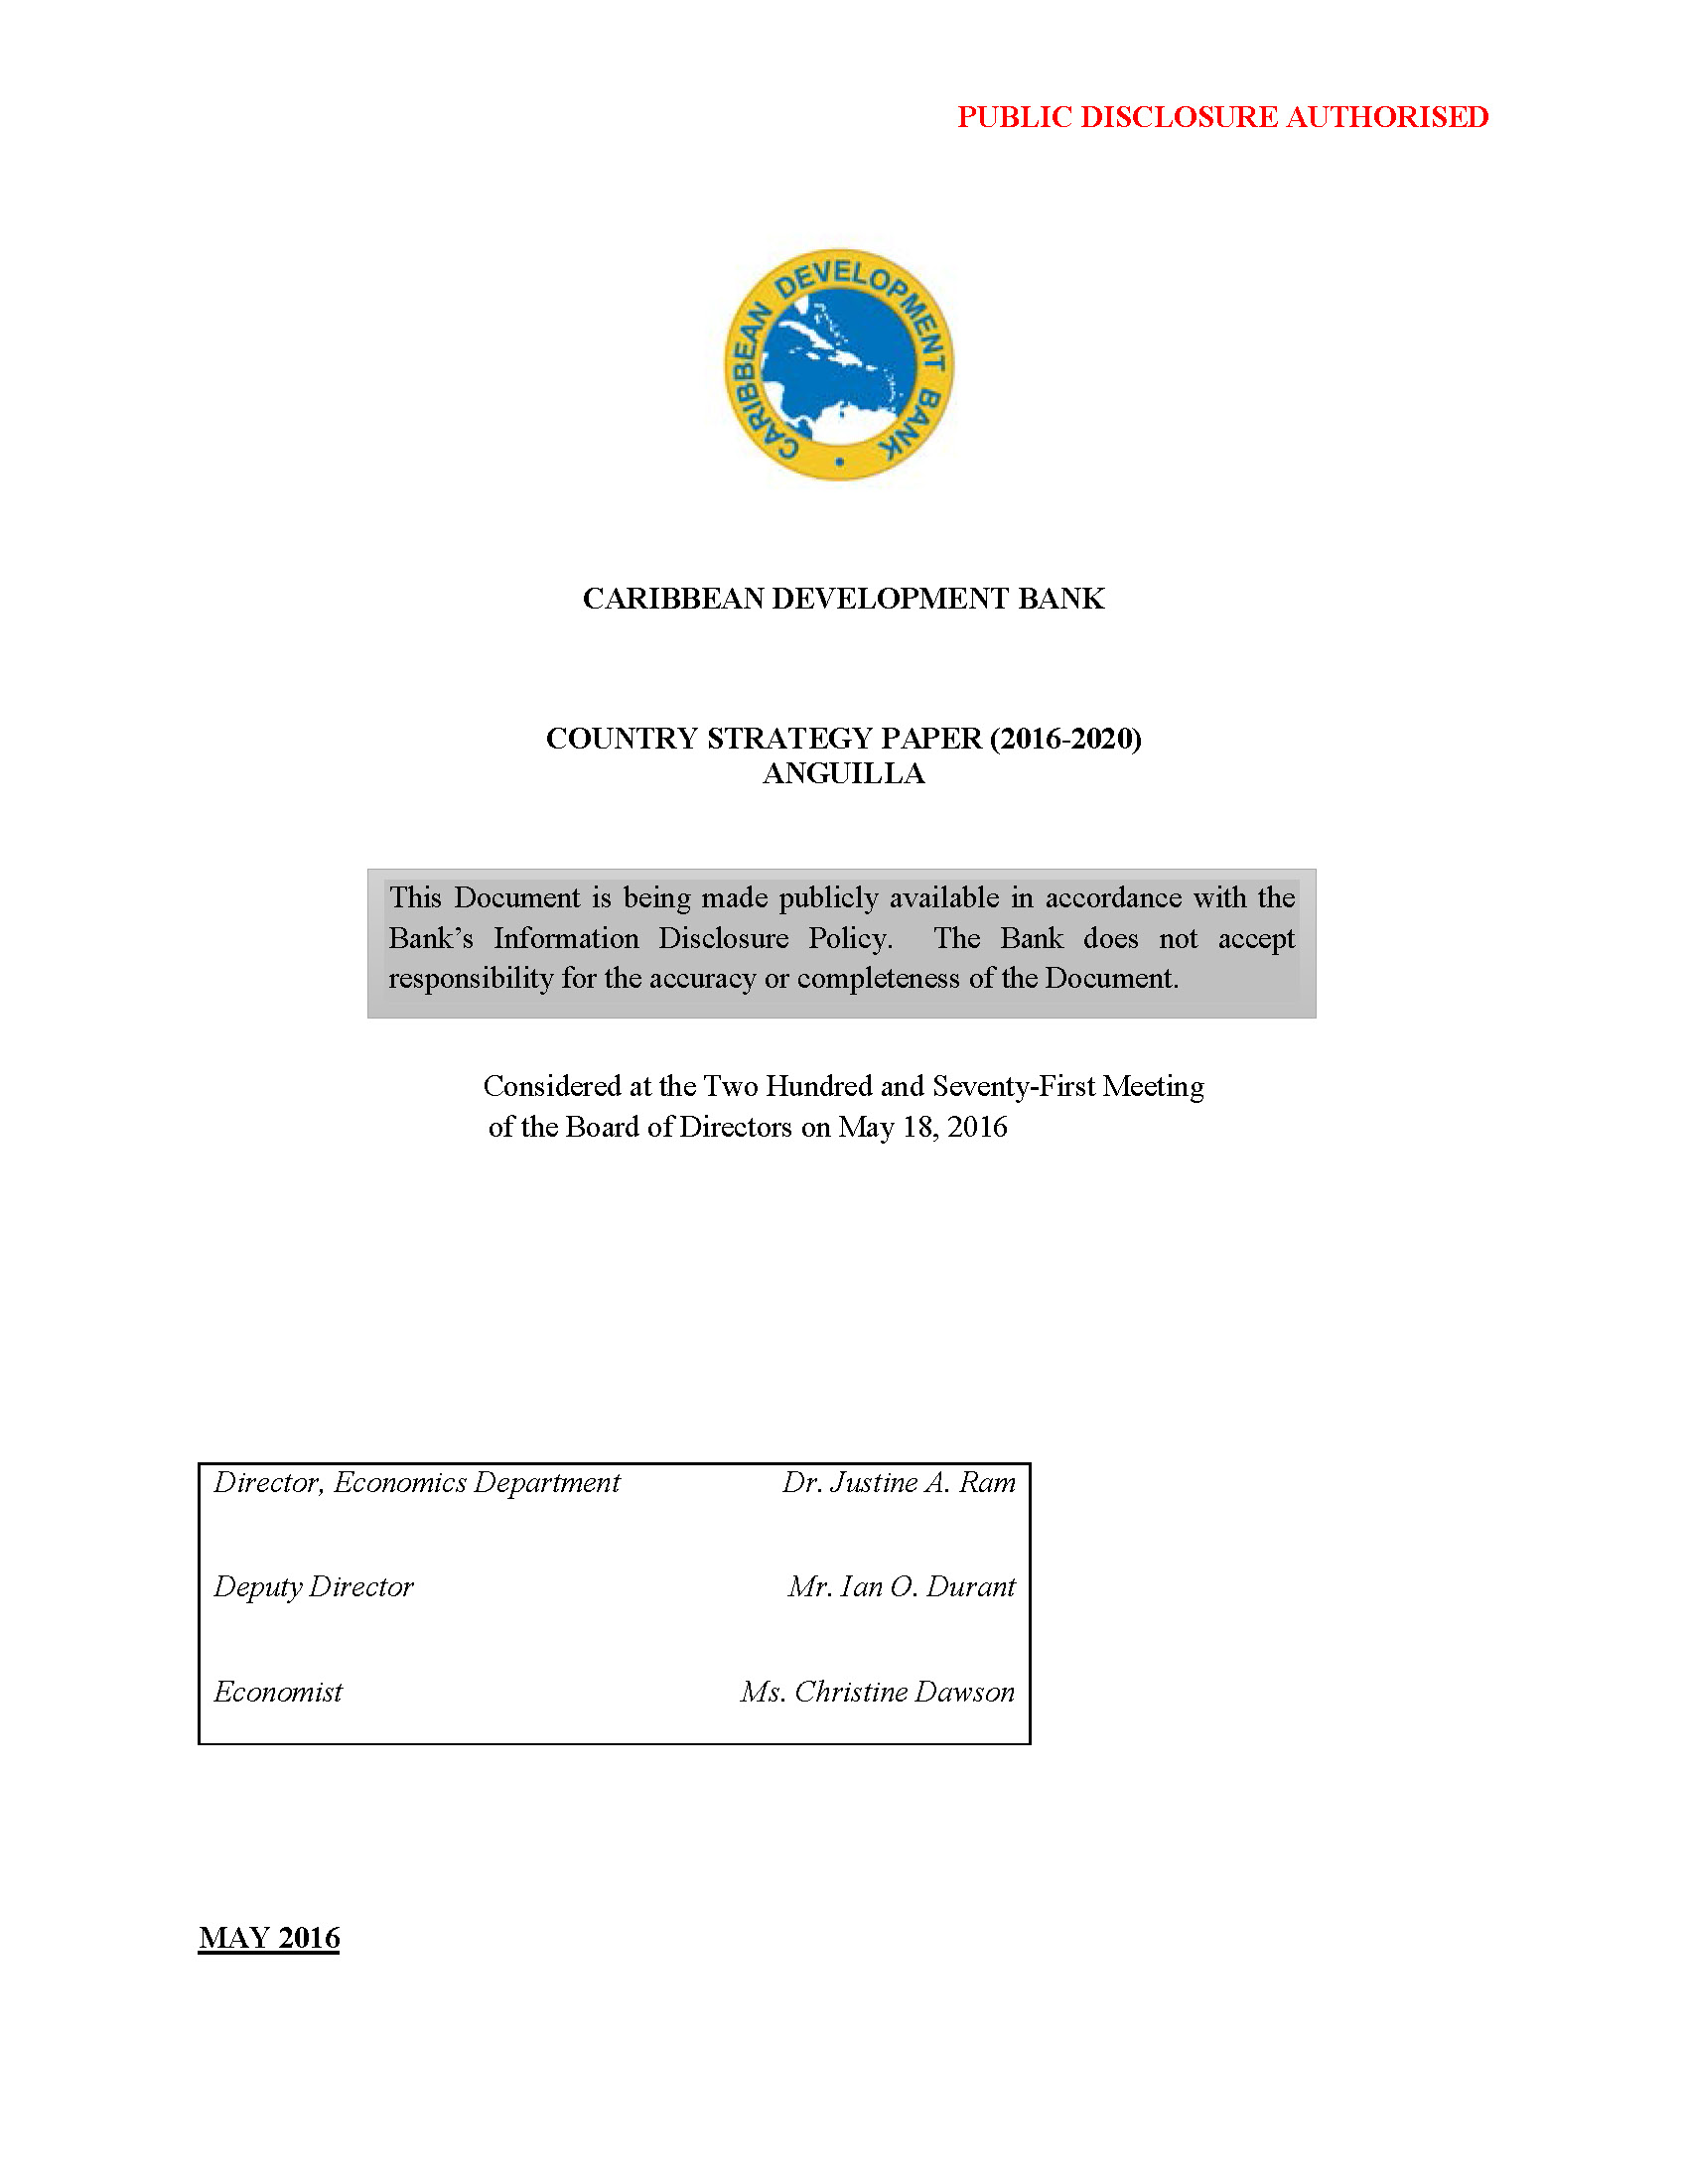 Text-based document cover for Anguilla's Country Strategy Paper 2016-2020